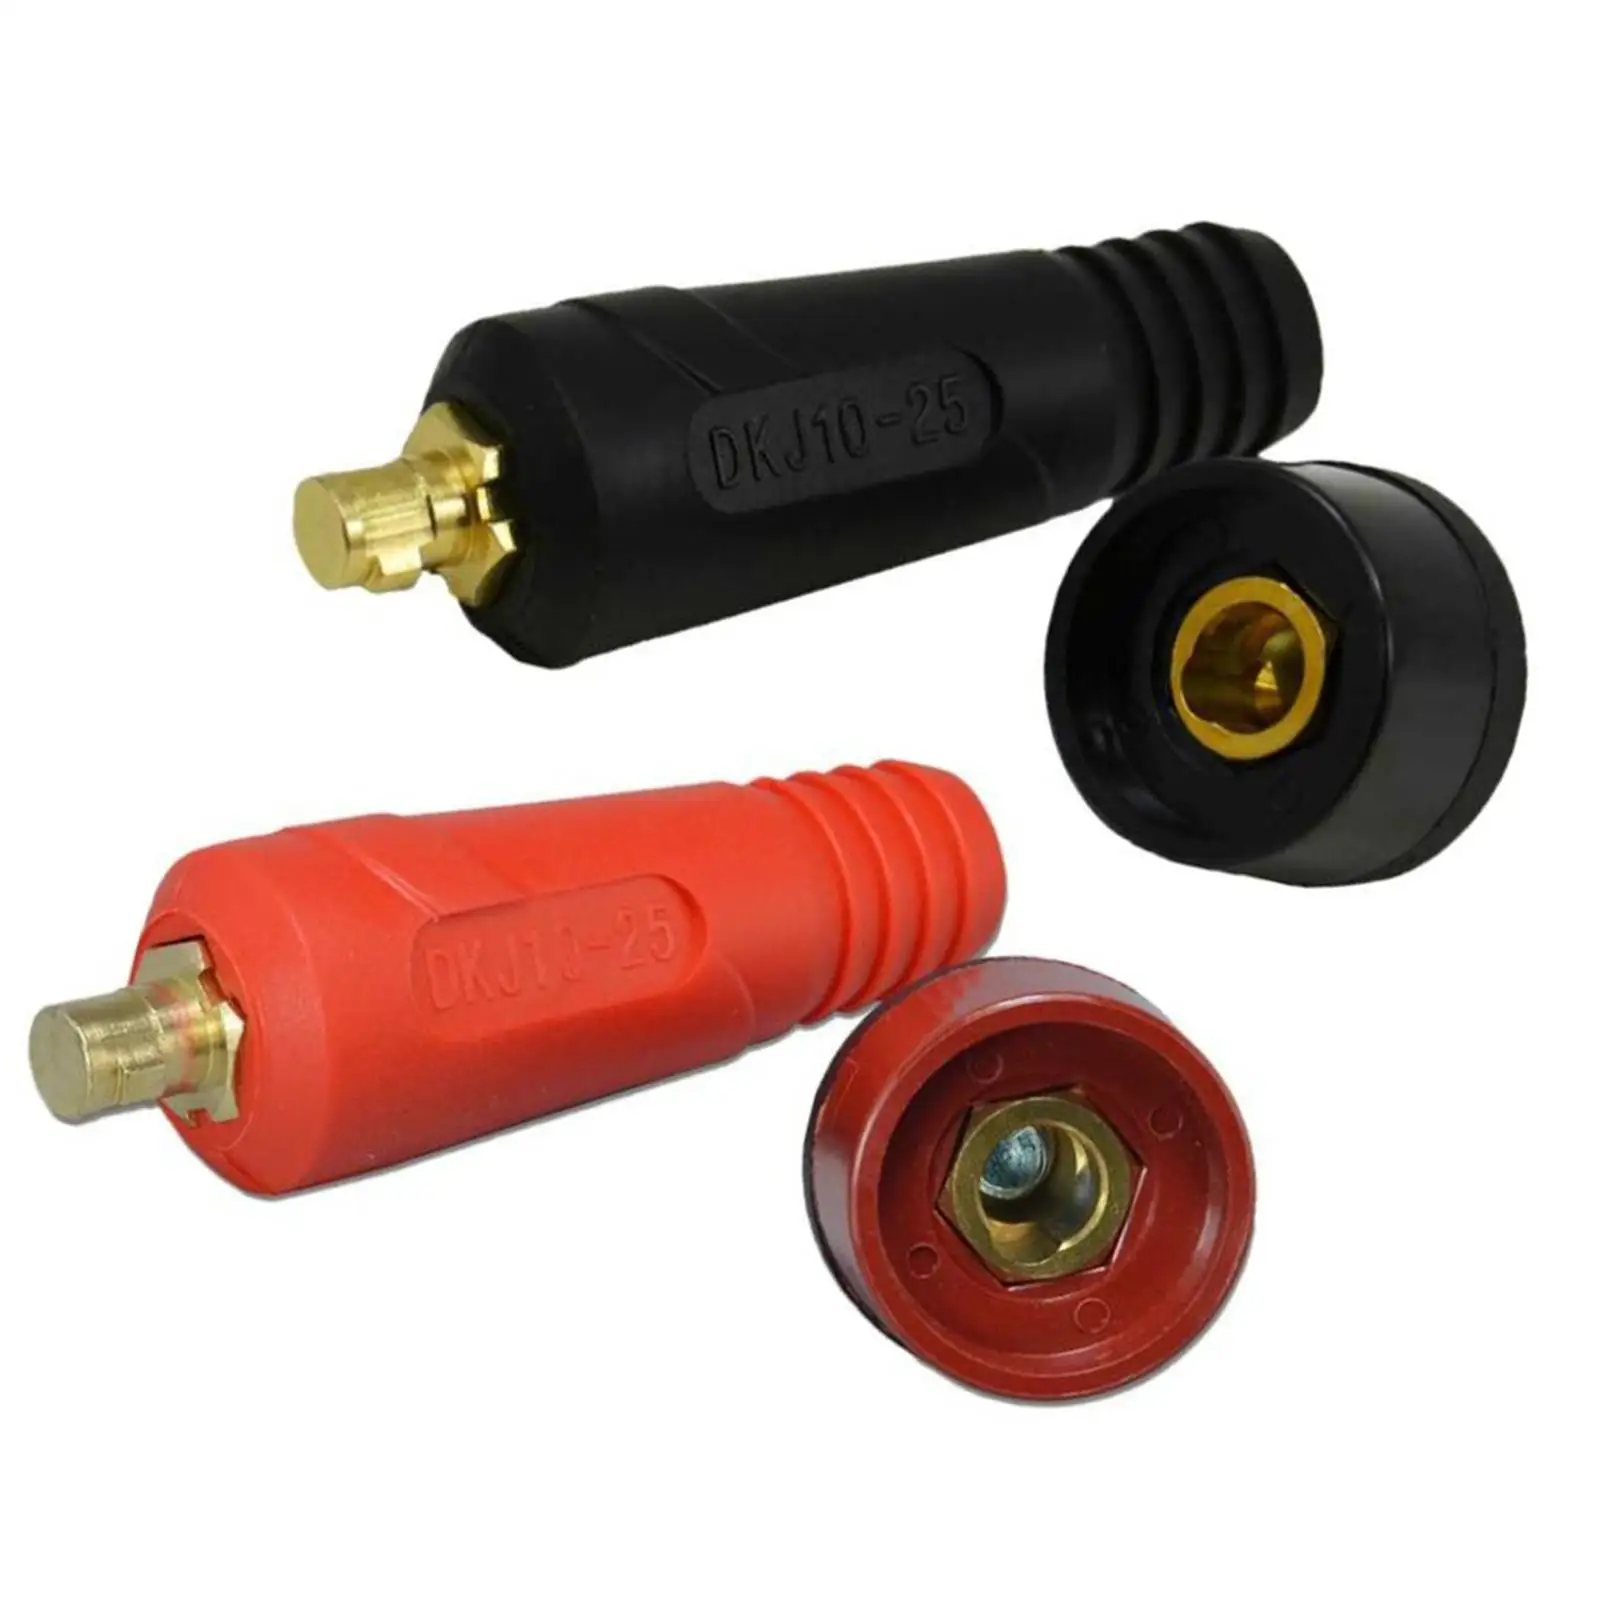 200Amp Cable Panel Connector Plug and Socket Welding Soldering Tools Quick Connect Connector